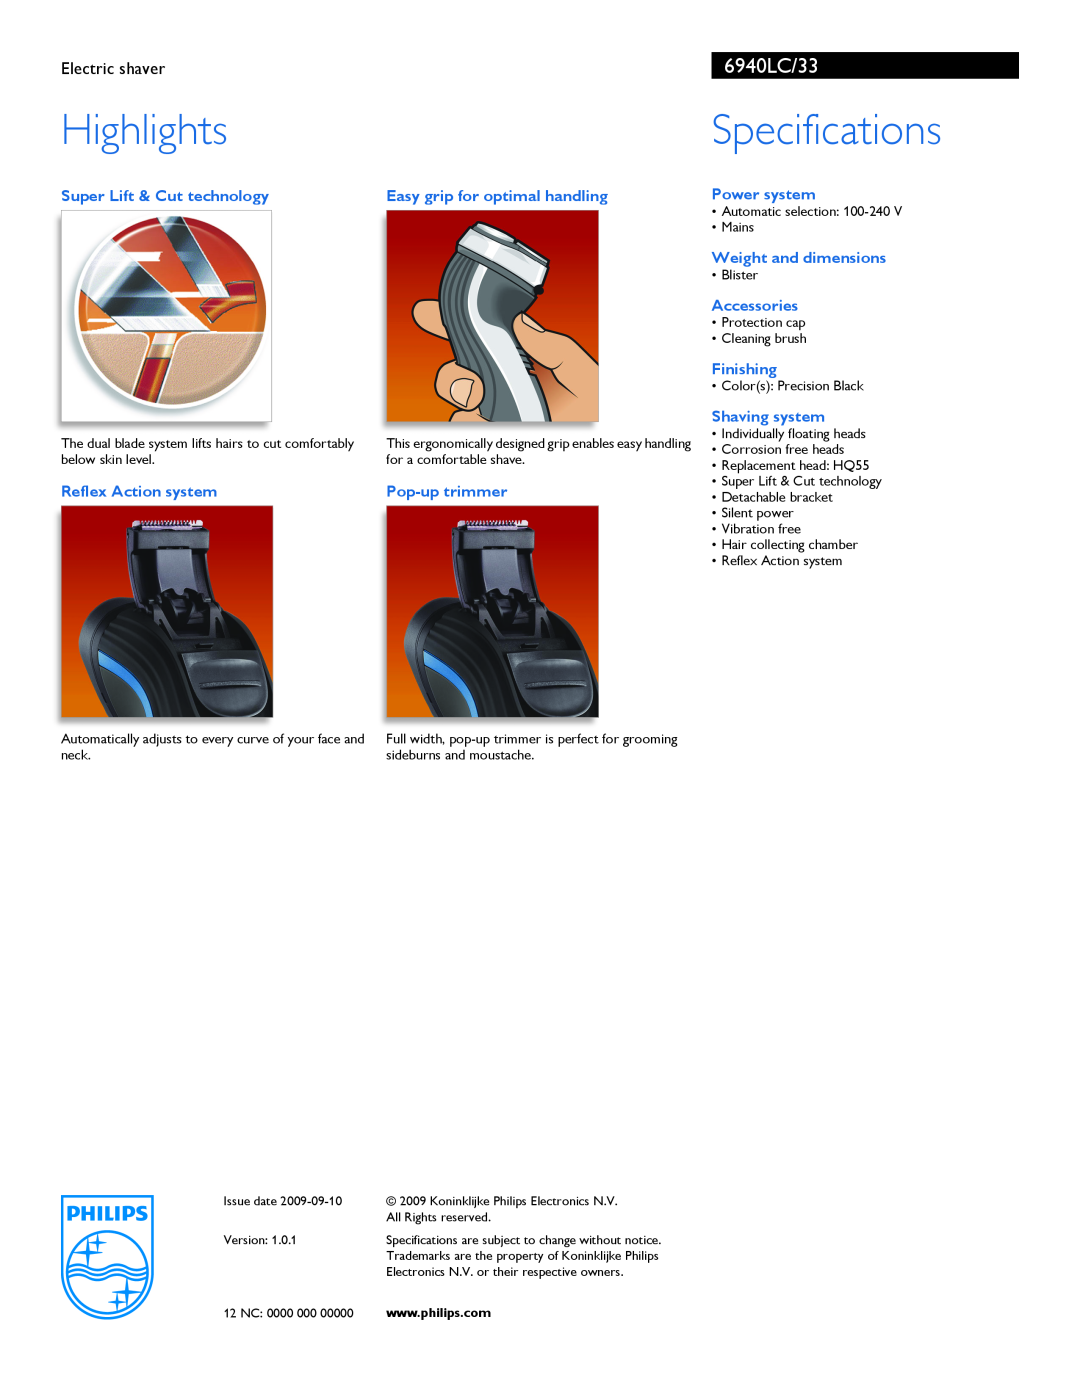 Philips 6940LC/33 manual Electric shaver, Super Lift & Cut technology, Reflex Action system, Pop-up trimmer, Power system 